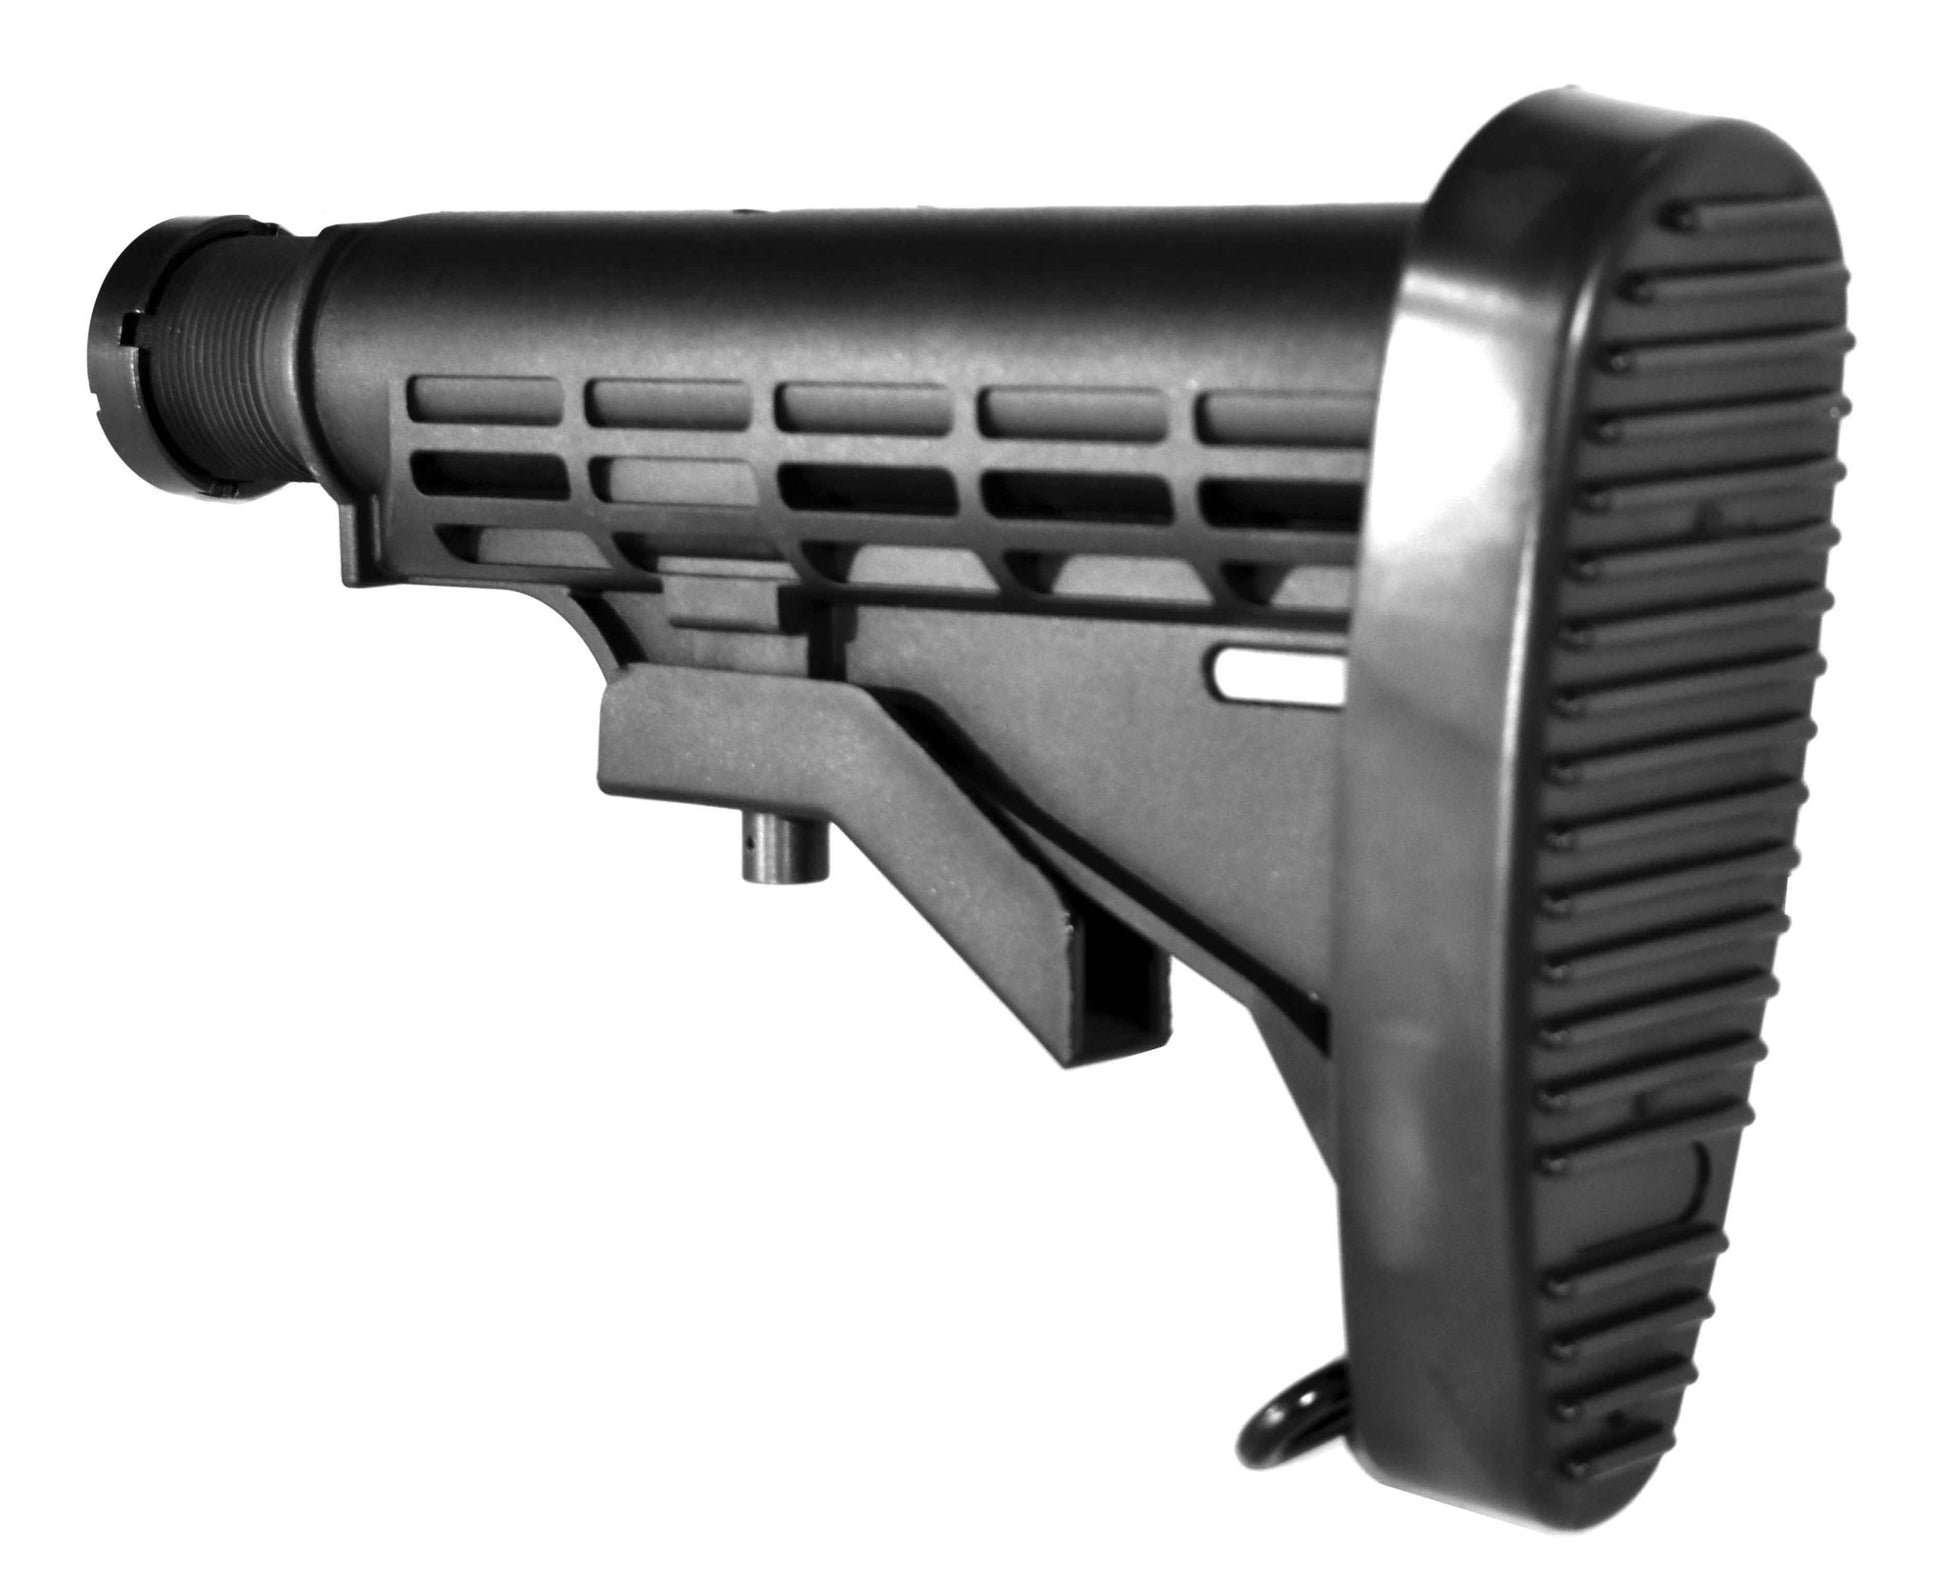 Tactical Adjustable Stock With Butt Pad Compatible With mil-spec threaded Mossberg 500 and Remington 870 pistol grips. - TRINITY SUPPLY INC